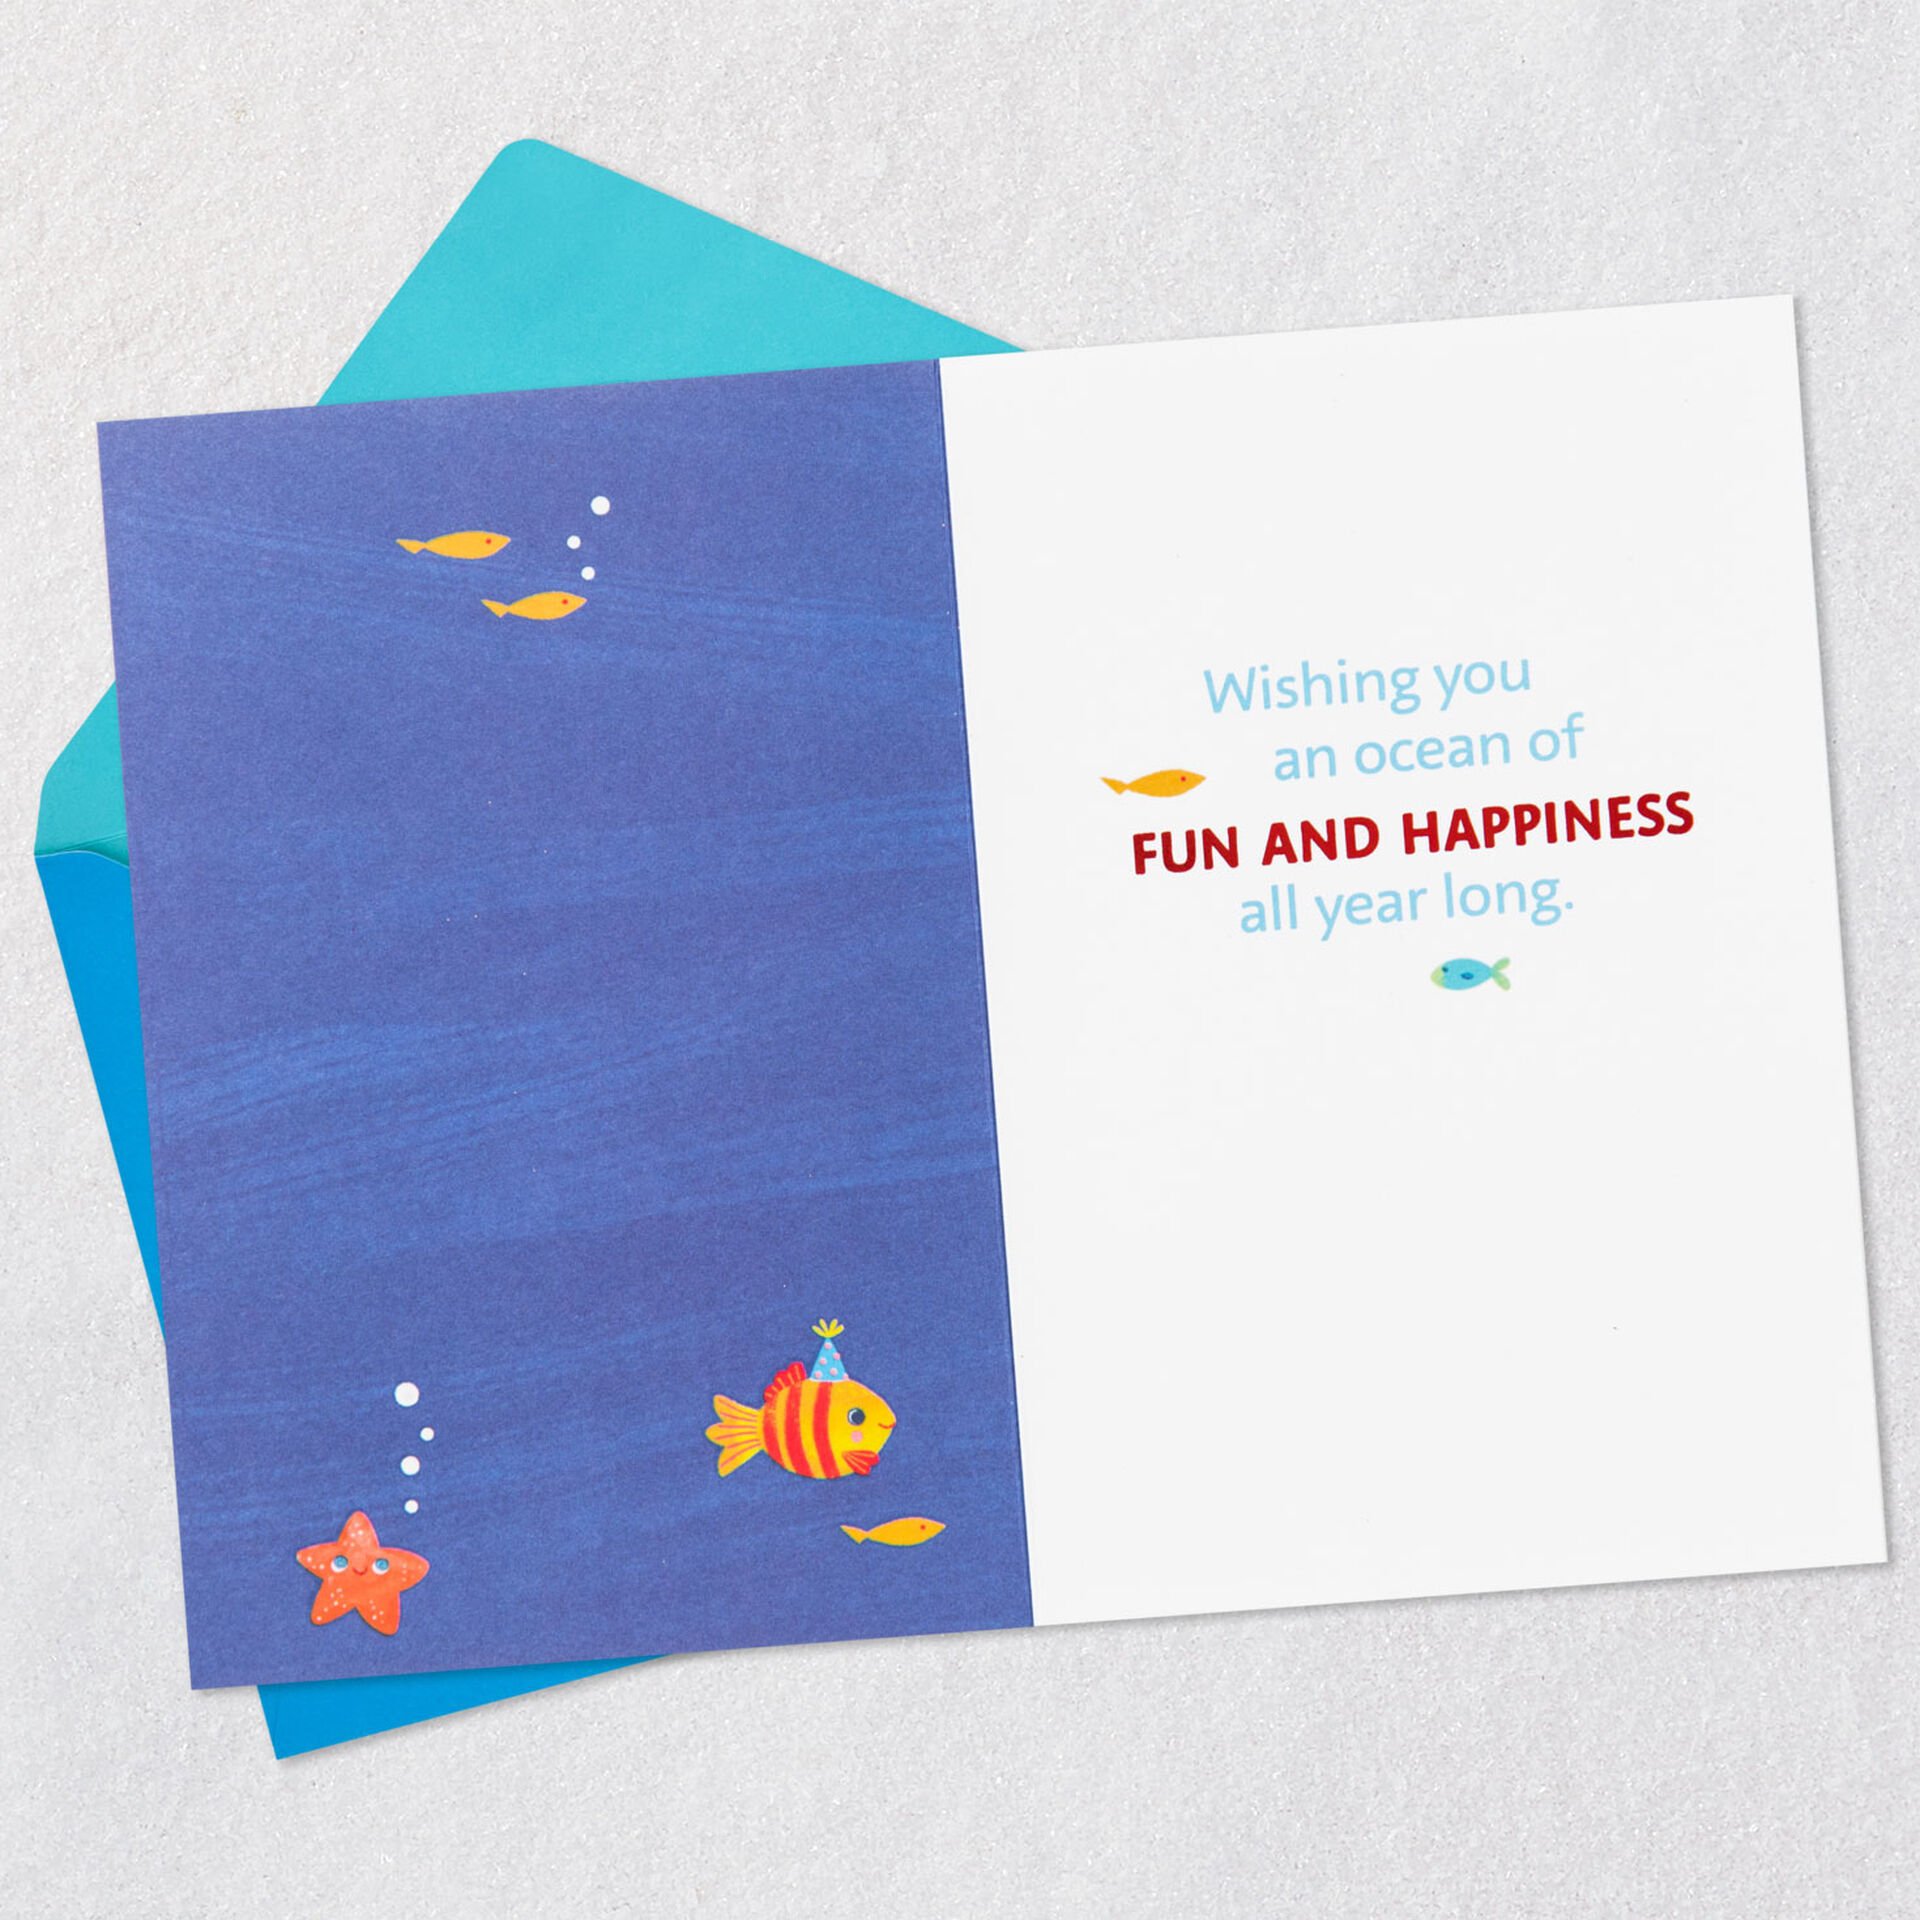 Shark-in-Party-Hat-Kids-Birthday-Card-for-GreatGrandson_299HKB6162_03